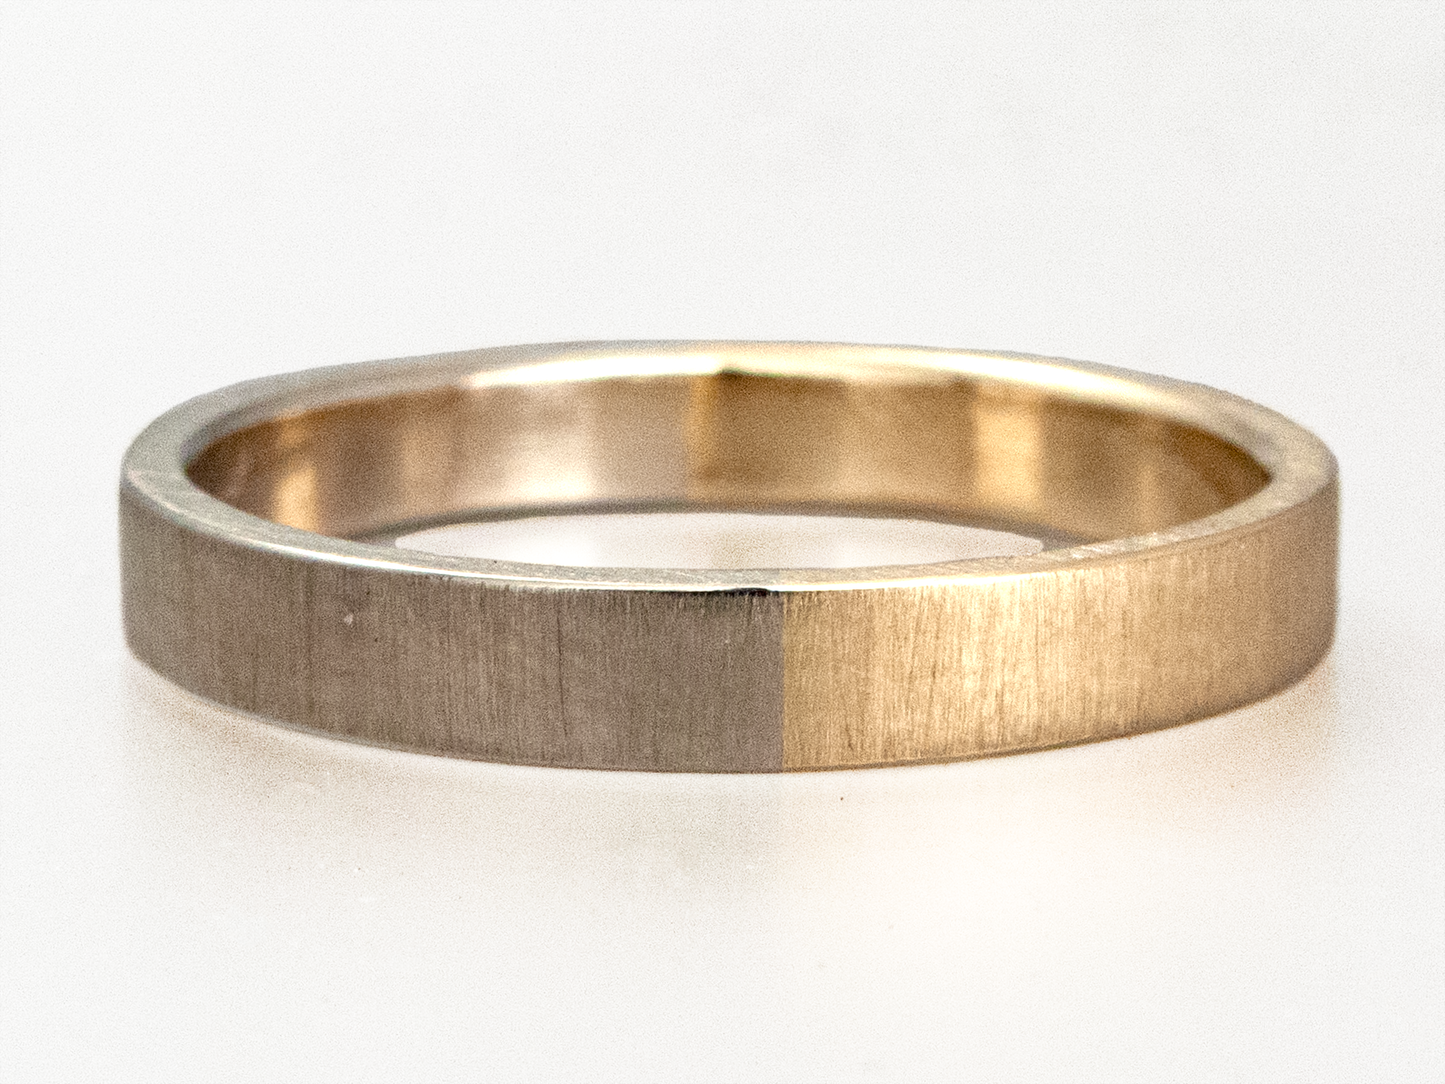 50/50 Partnership Wide Flat Two Tone Gold Wedding Ring - mix of 14k white, yellow or rose gold, 3mm-6mm width